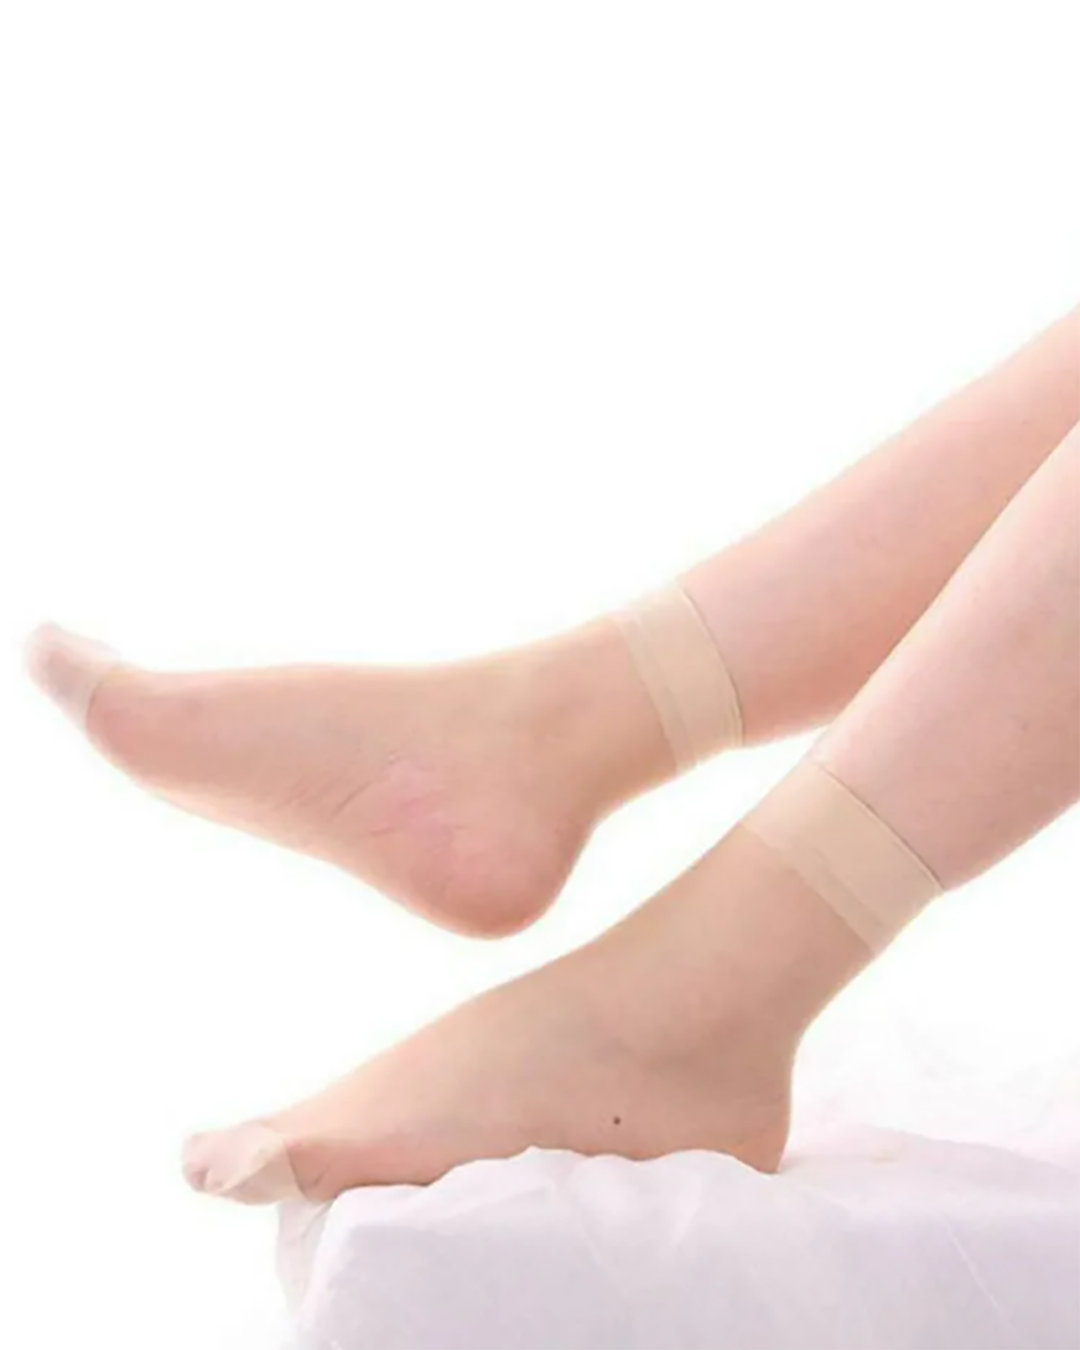 Anklet Invisible Socks 5 Pairs